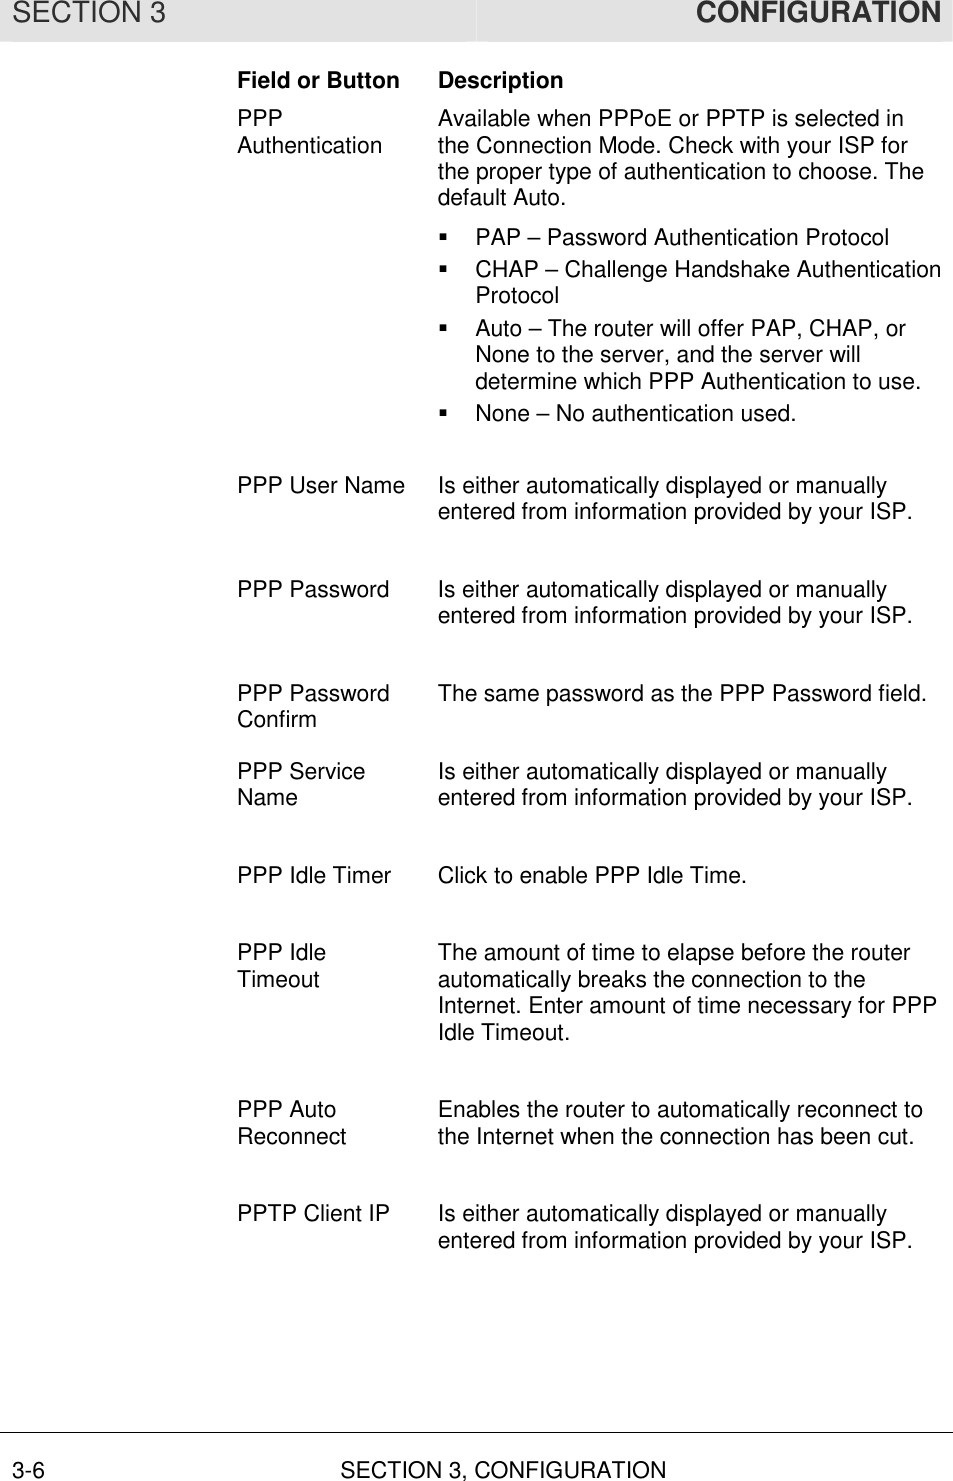 SECTION 3  CONFIGURATION 3-6  SECTION 3, CONFIGURATION  Field or Button  Description PPP Authentication  Available when PPPoE or PPTP is selected in the Connection Mode. Check with your ISP for the proper type of authentication to choose. The default Auto. !  PAP – Password Authentication Protocol !  CHAP – Challenge Handshake Authentication Protocol !  Auto – The router will offer PAP, CHAP, or None to the server, and the server will determine which PPP Authentication to use. !  None – No authentication used.  PPP User Name  Is either automatically displayed or manually entered from information provided by your ISP.  PPP Password  Is either automatically displayed or manually entered from information provided by your ISP.  PPP Password Confirm  The same password as the PPP Password field.  PPP Service Name  Is either automatically displayed or manually entered from information provided by your ISP.  PPP Idle Timer  Click to enable PPP Idle Time.   PPP Idle Timeout  The amount of time to elapse before the router automatically breaks the connection to the Internet. Enter amount of time necessary for PPP Idle Timeout.  PPP Auto Reconnect  Enables the router to automatically reconnect to the Internet when the connection has been cut.  PPTP Client IP  Is either automatically displayed or manually entered from information provided by your ISP.  